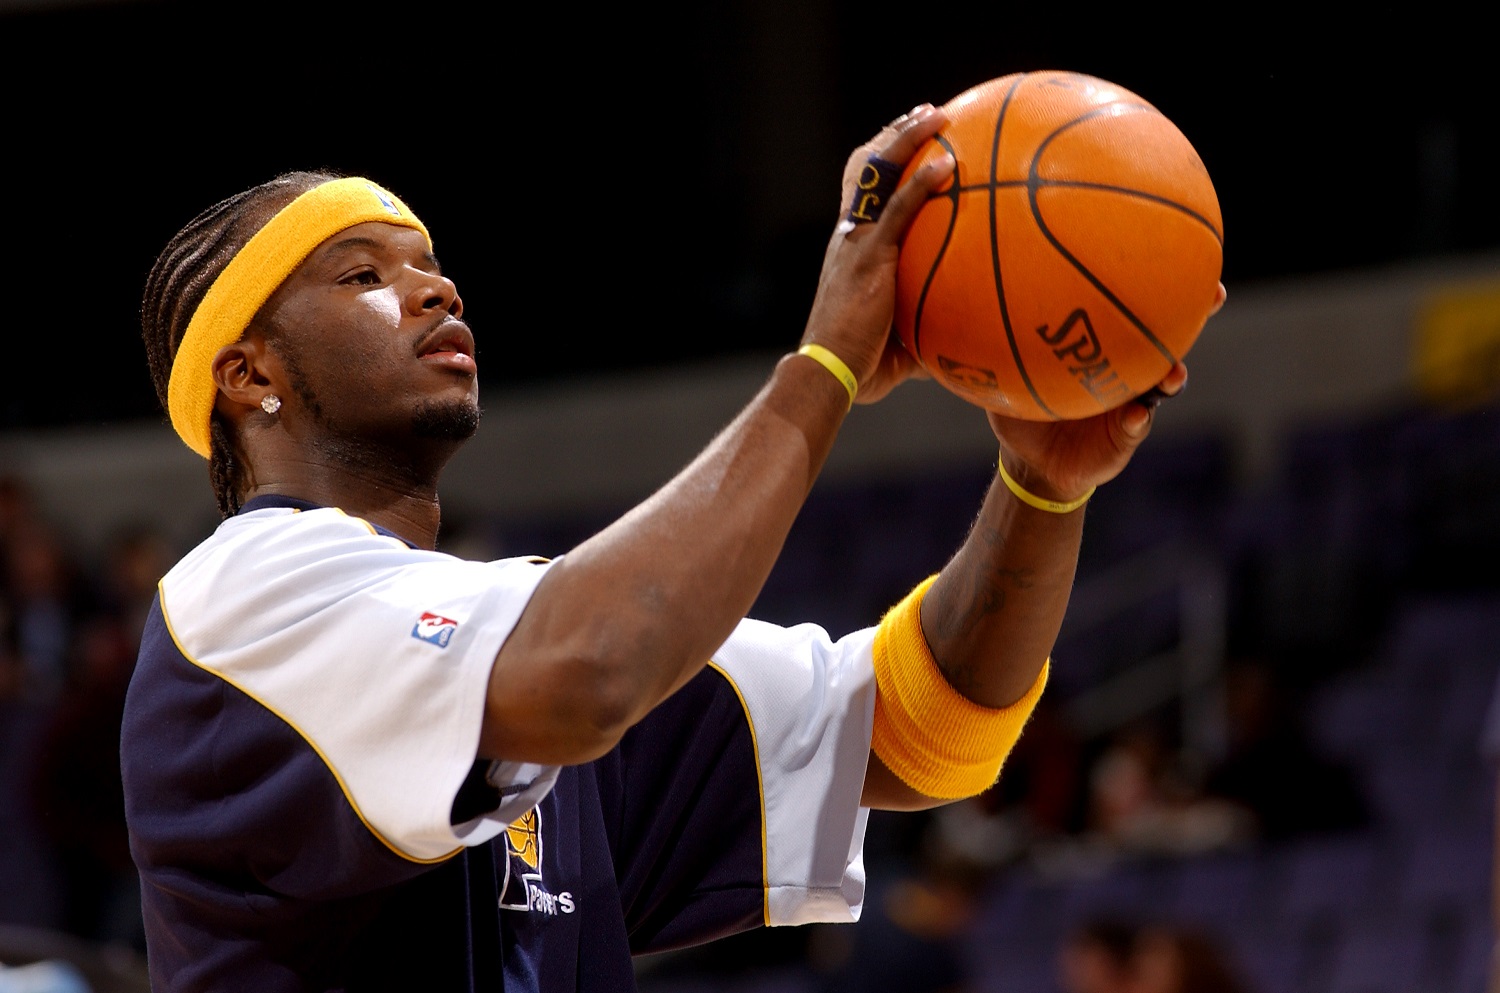 Jermaine O'Neal of the Indiana Pacers warms up before the game against the Washington Wizards on Jan. 4, 2003, at the MCI Center in Washington, D.C.